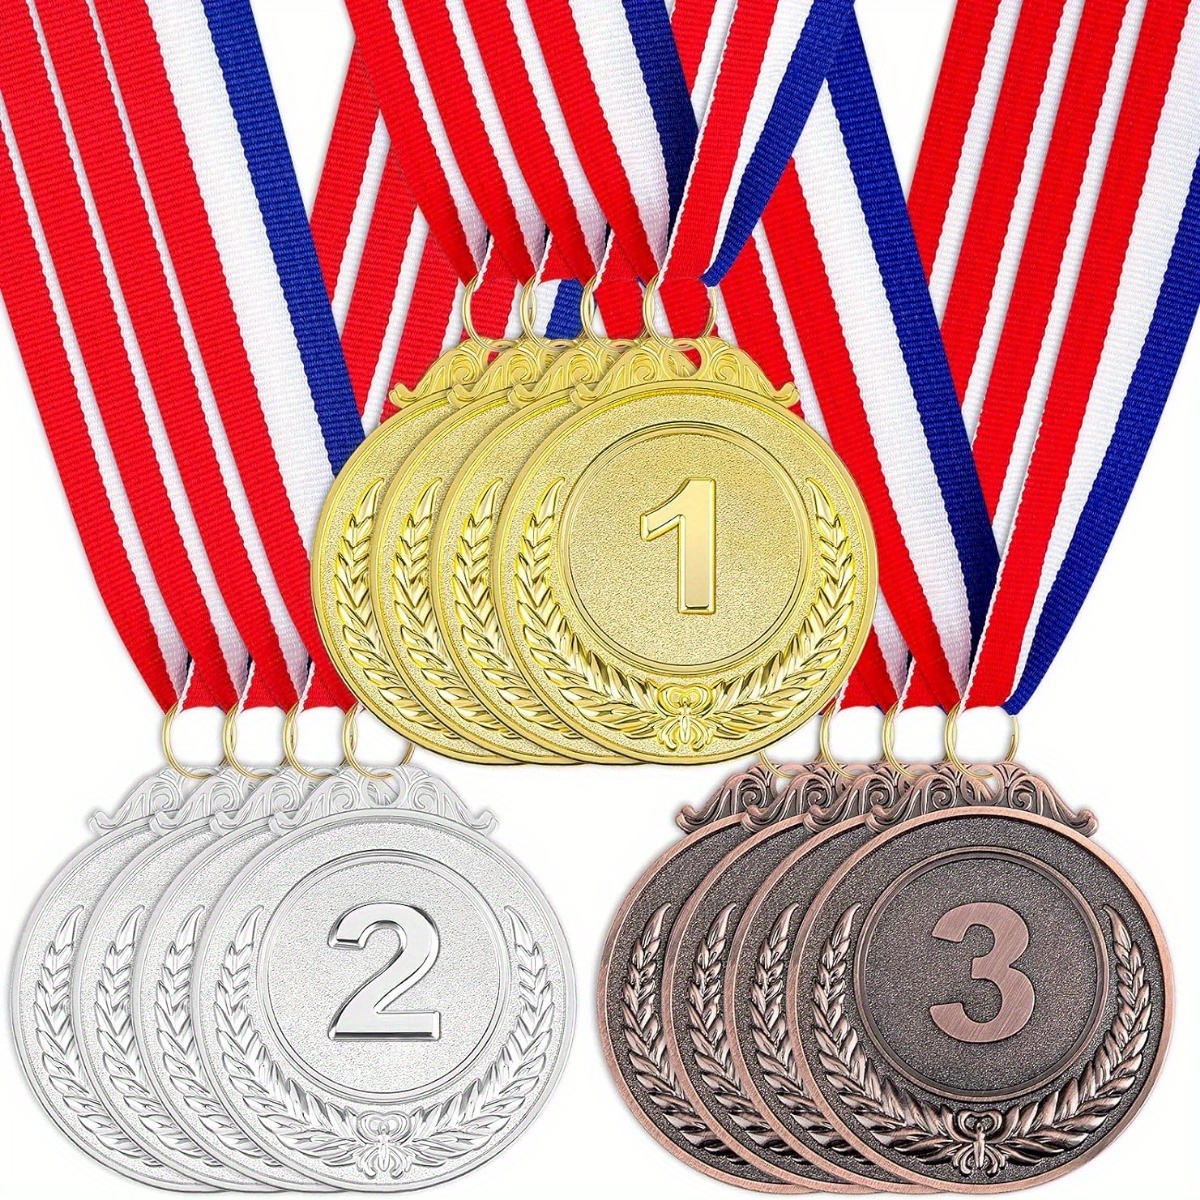 

6-piece Metallic Winner Medals In First, Second, And Third Place With Neck Ribbons - Ideal For Sports Events, Classroom Competitions & Office Games